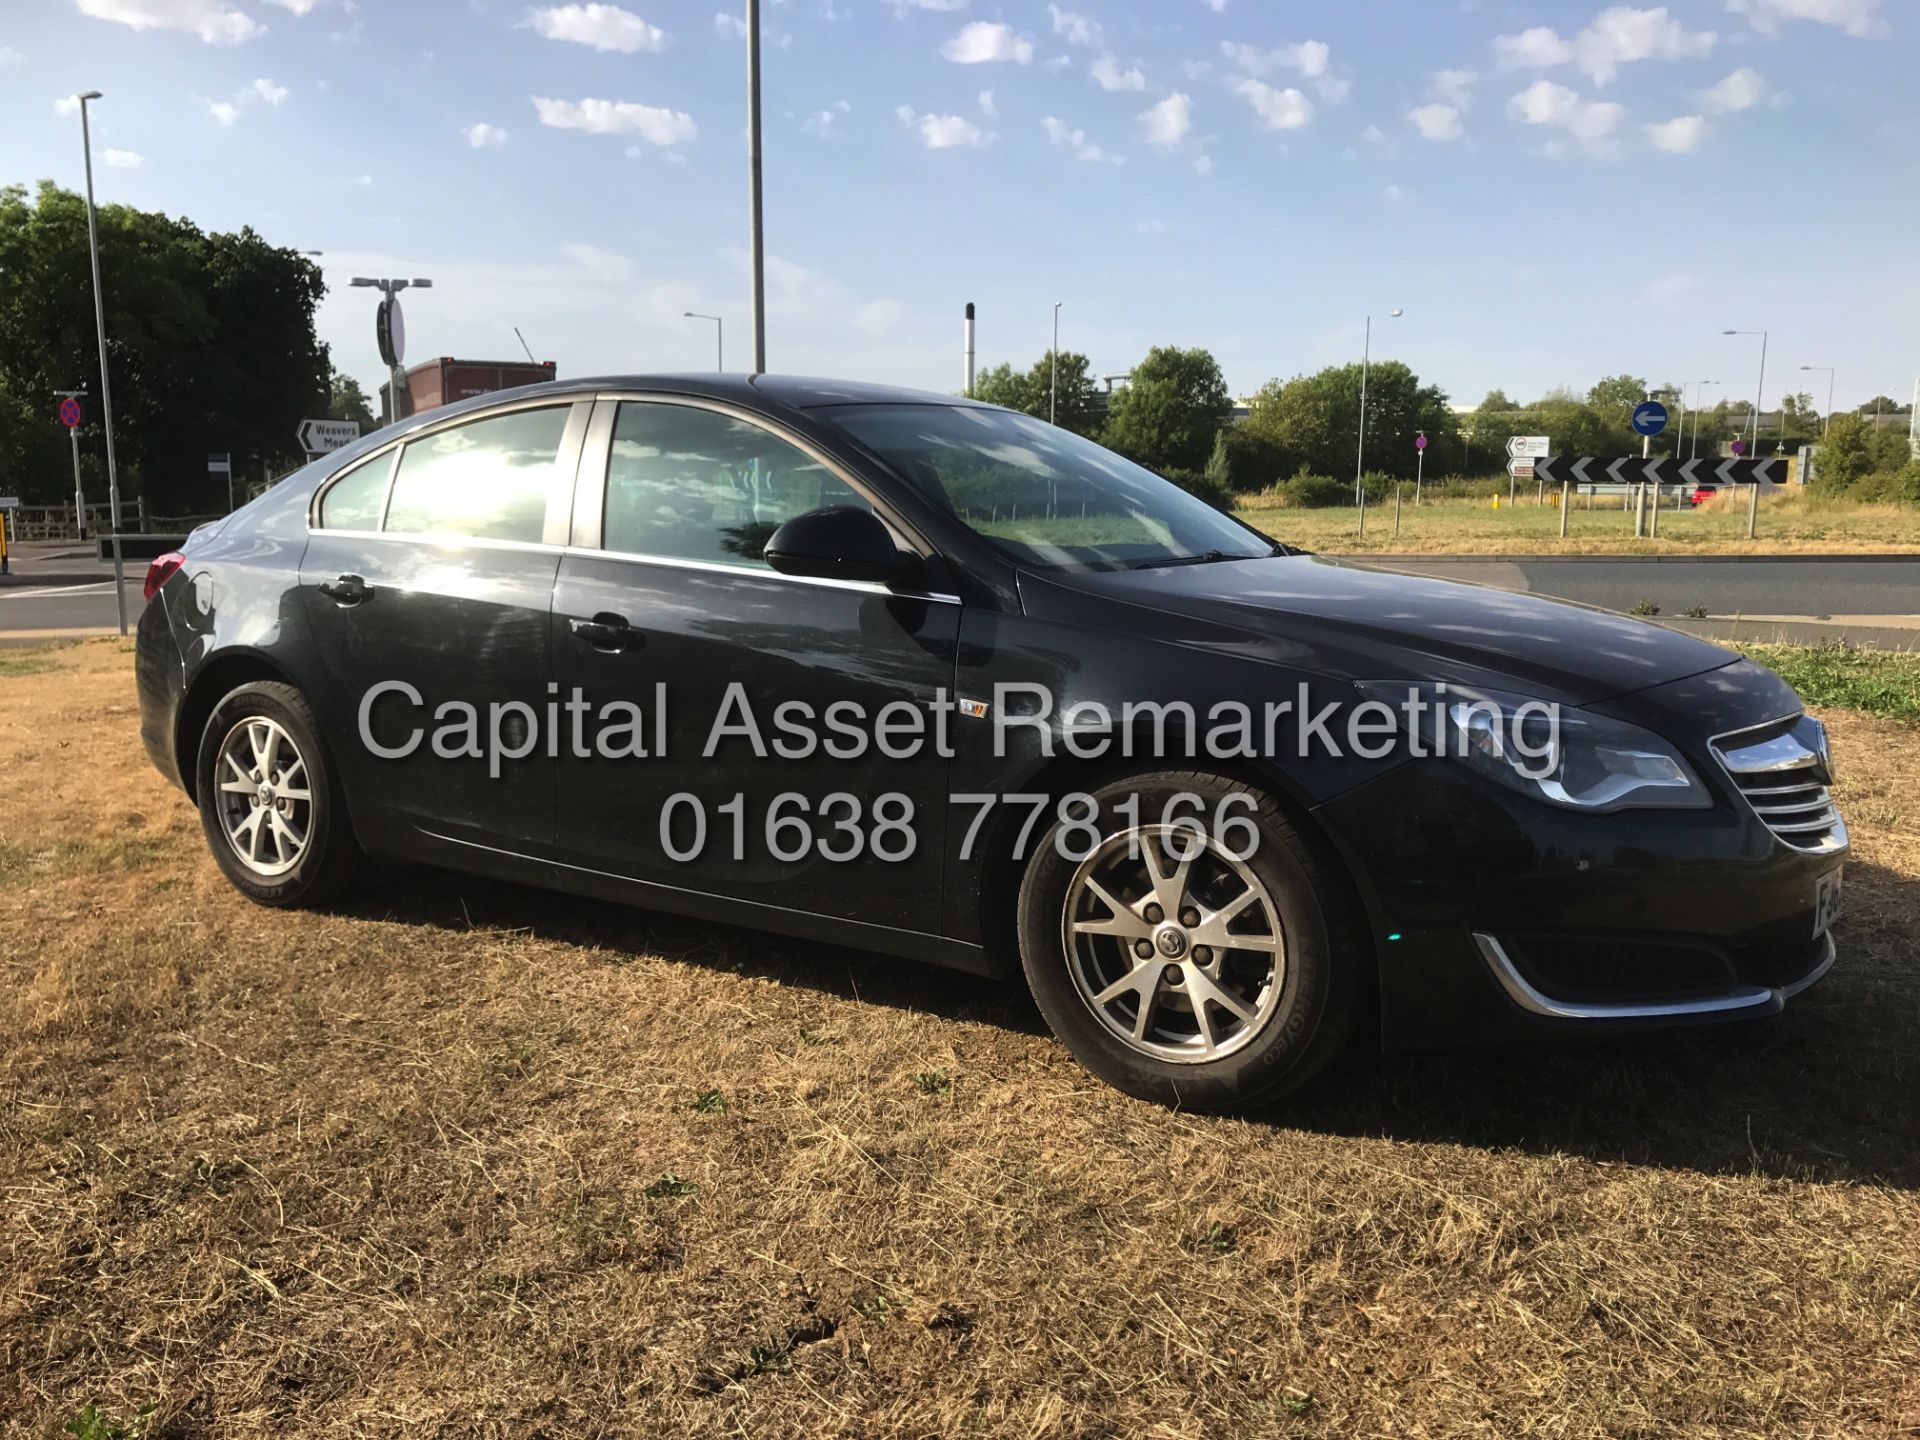 On Sale VAUXHALL INSIGNIA 2.0CDTI "DESIGN" 6 SPEED (2014 MODEL-NEW SHAPE) AIR CON -ELEC PACK -CRUISE - Image 8 of 22